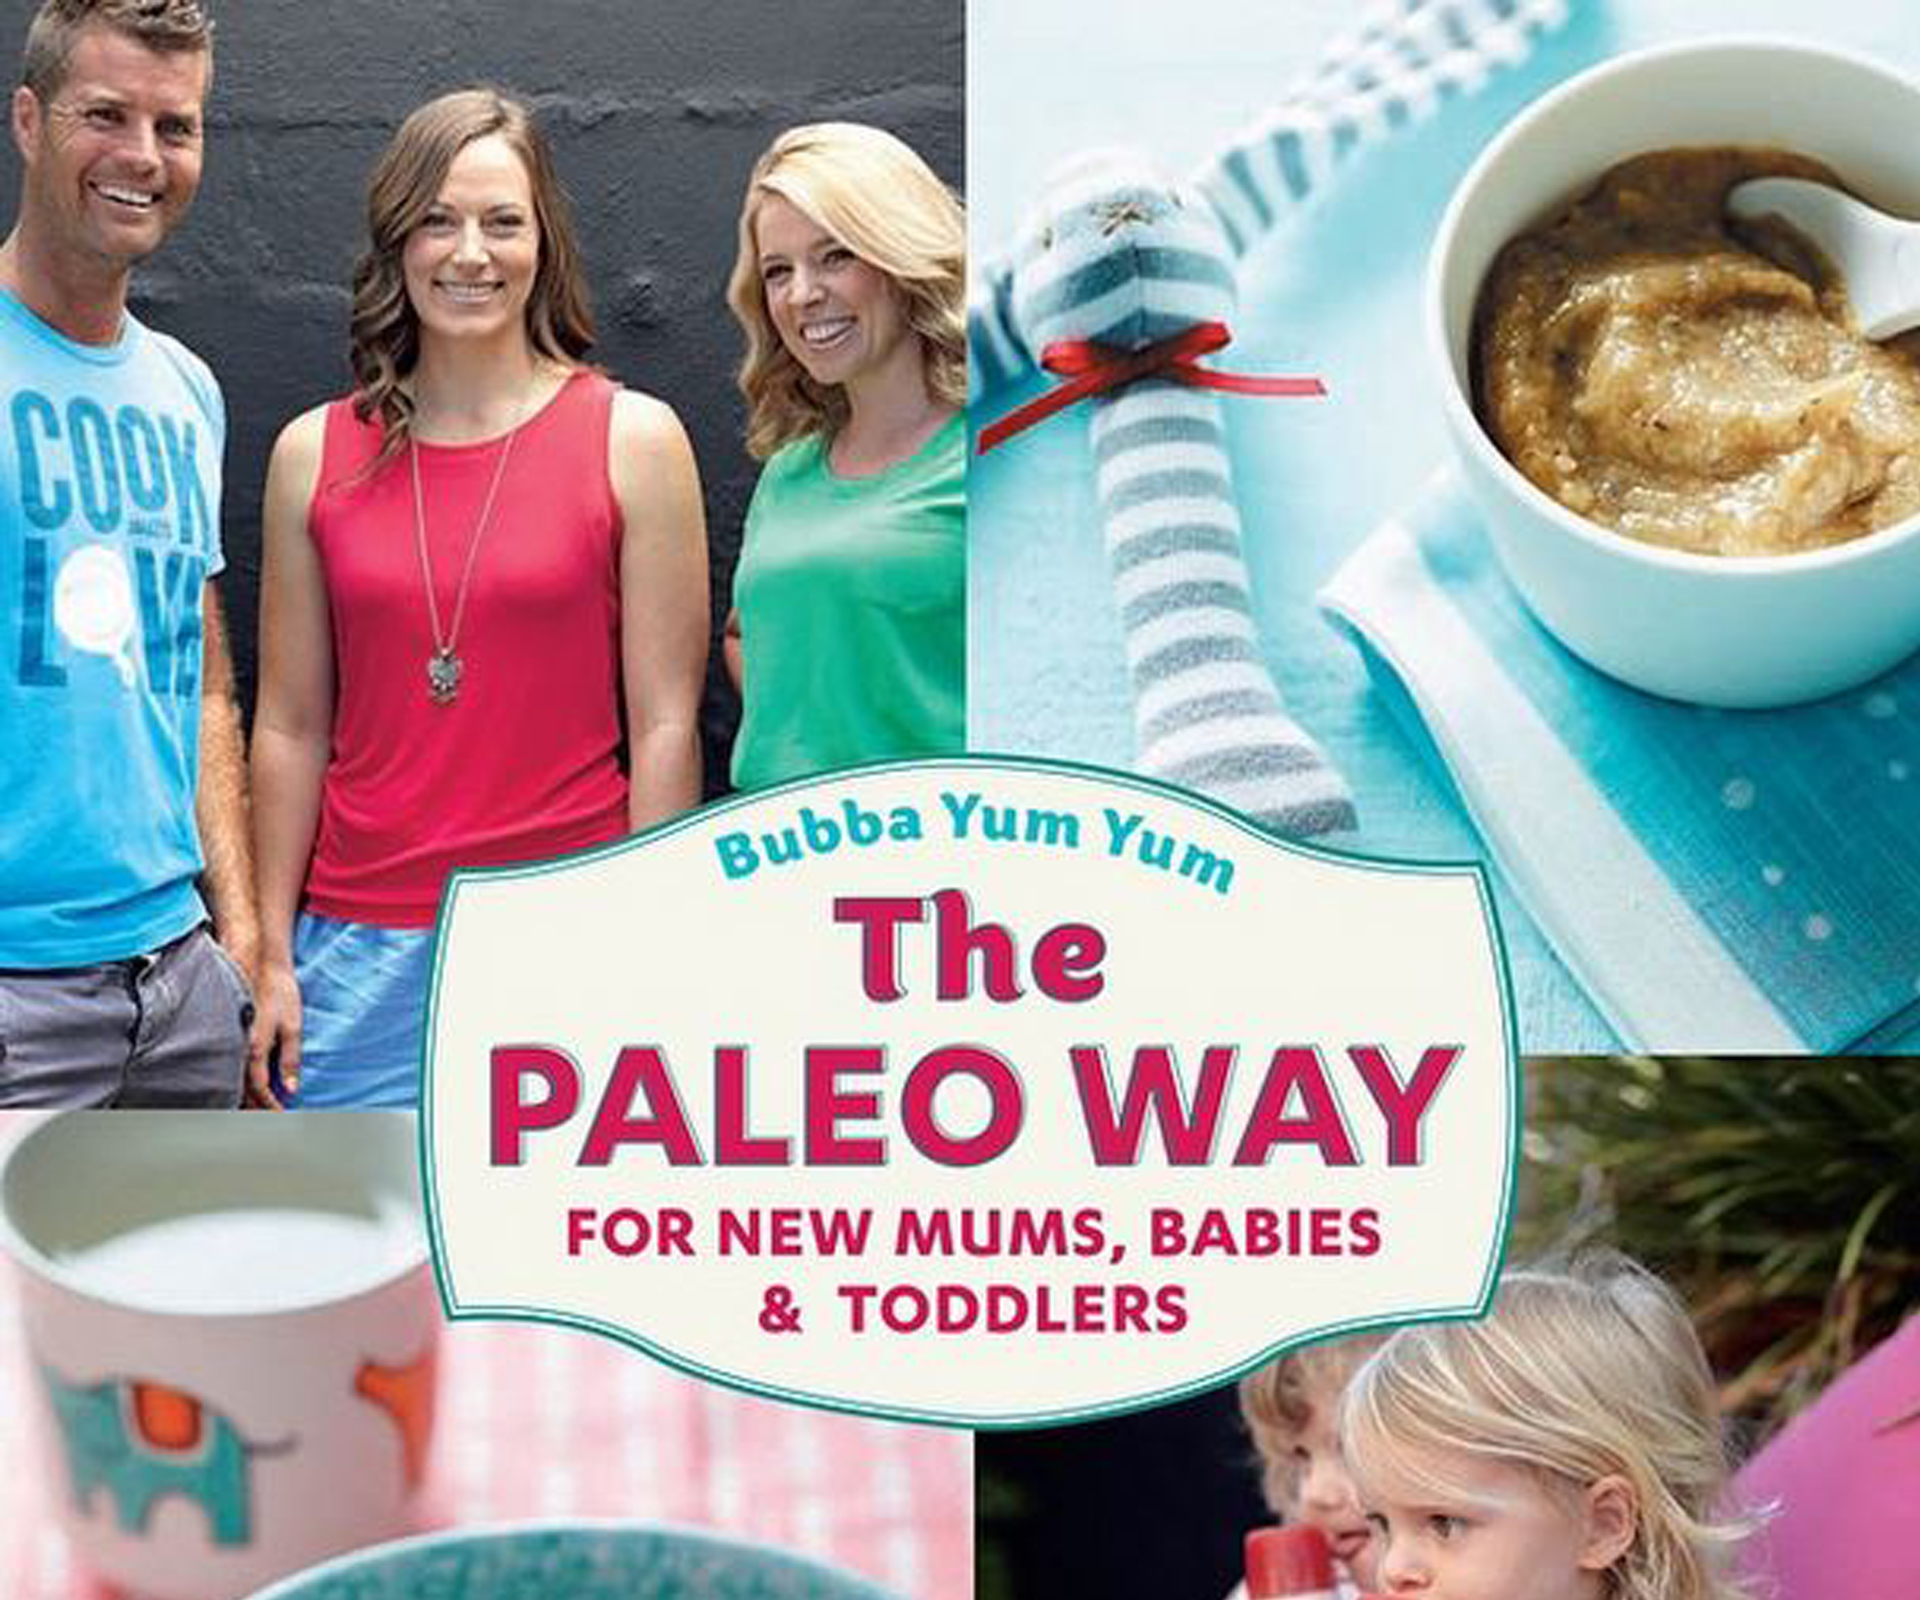 “We’re really confident:” authors of Pete Evans’ paleo cookbook for babies break their silence